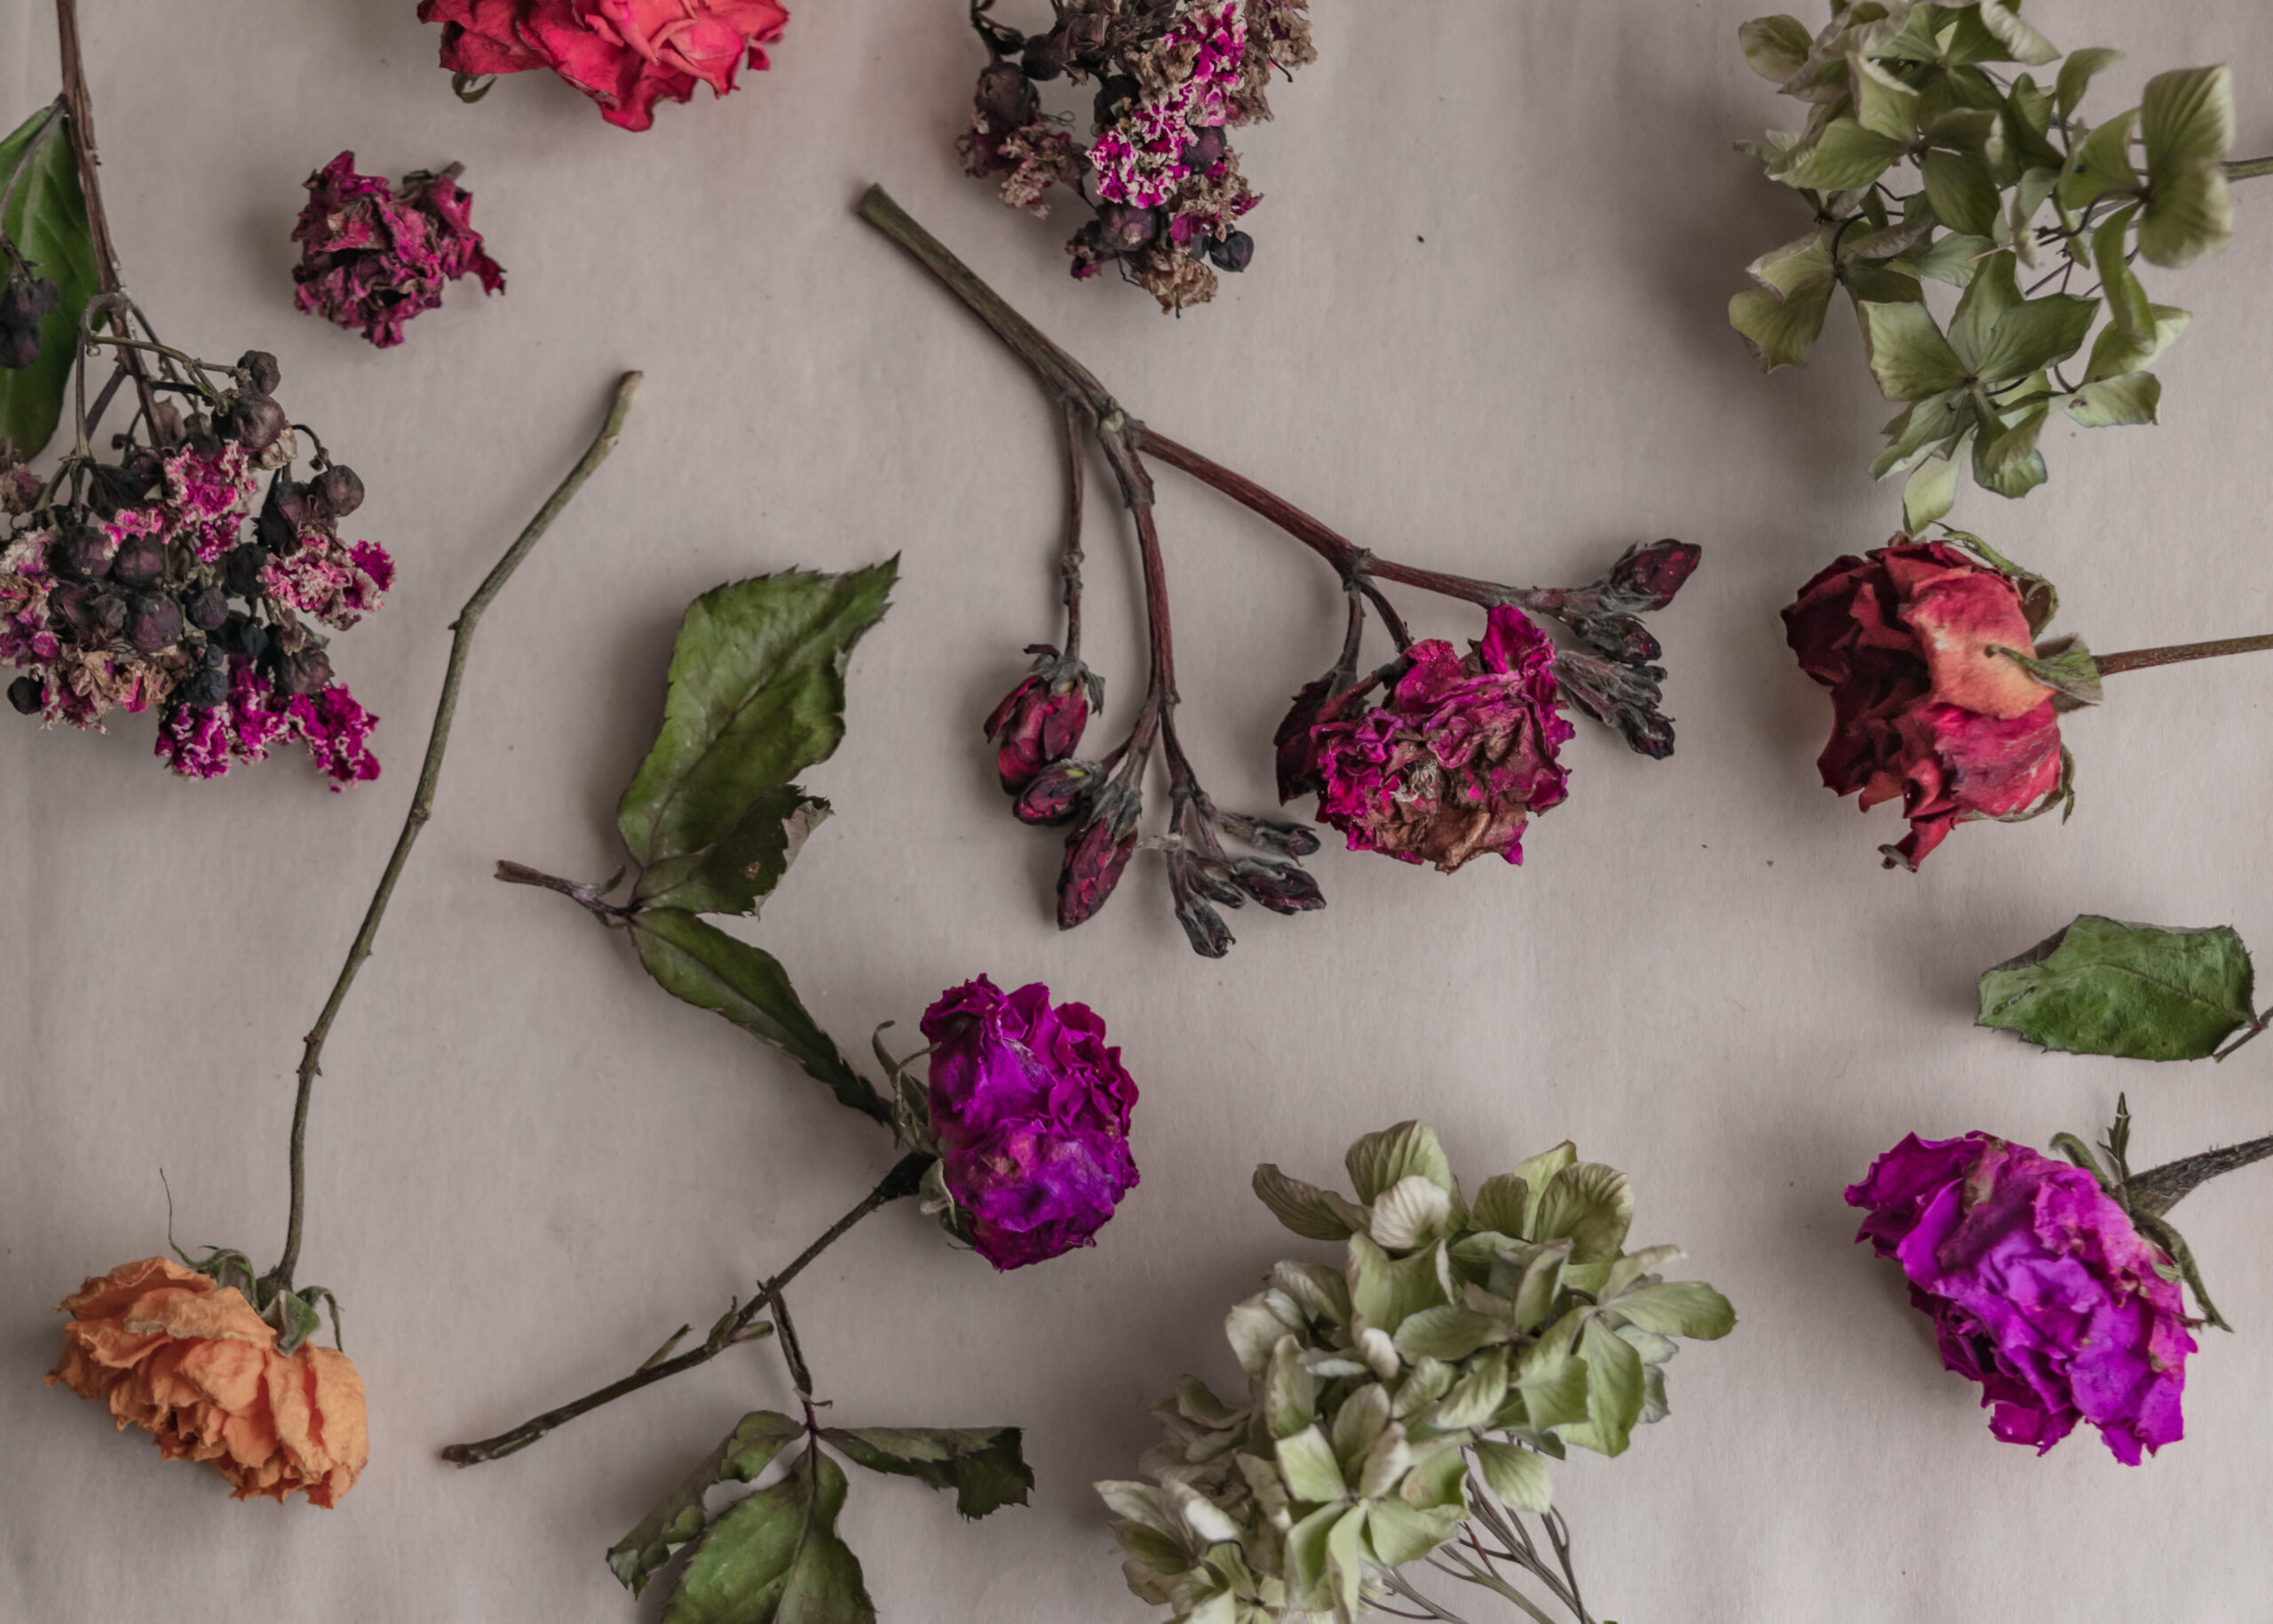 Dried Flowers vs. Preserved Flowers: What's the Difference?